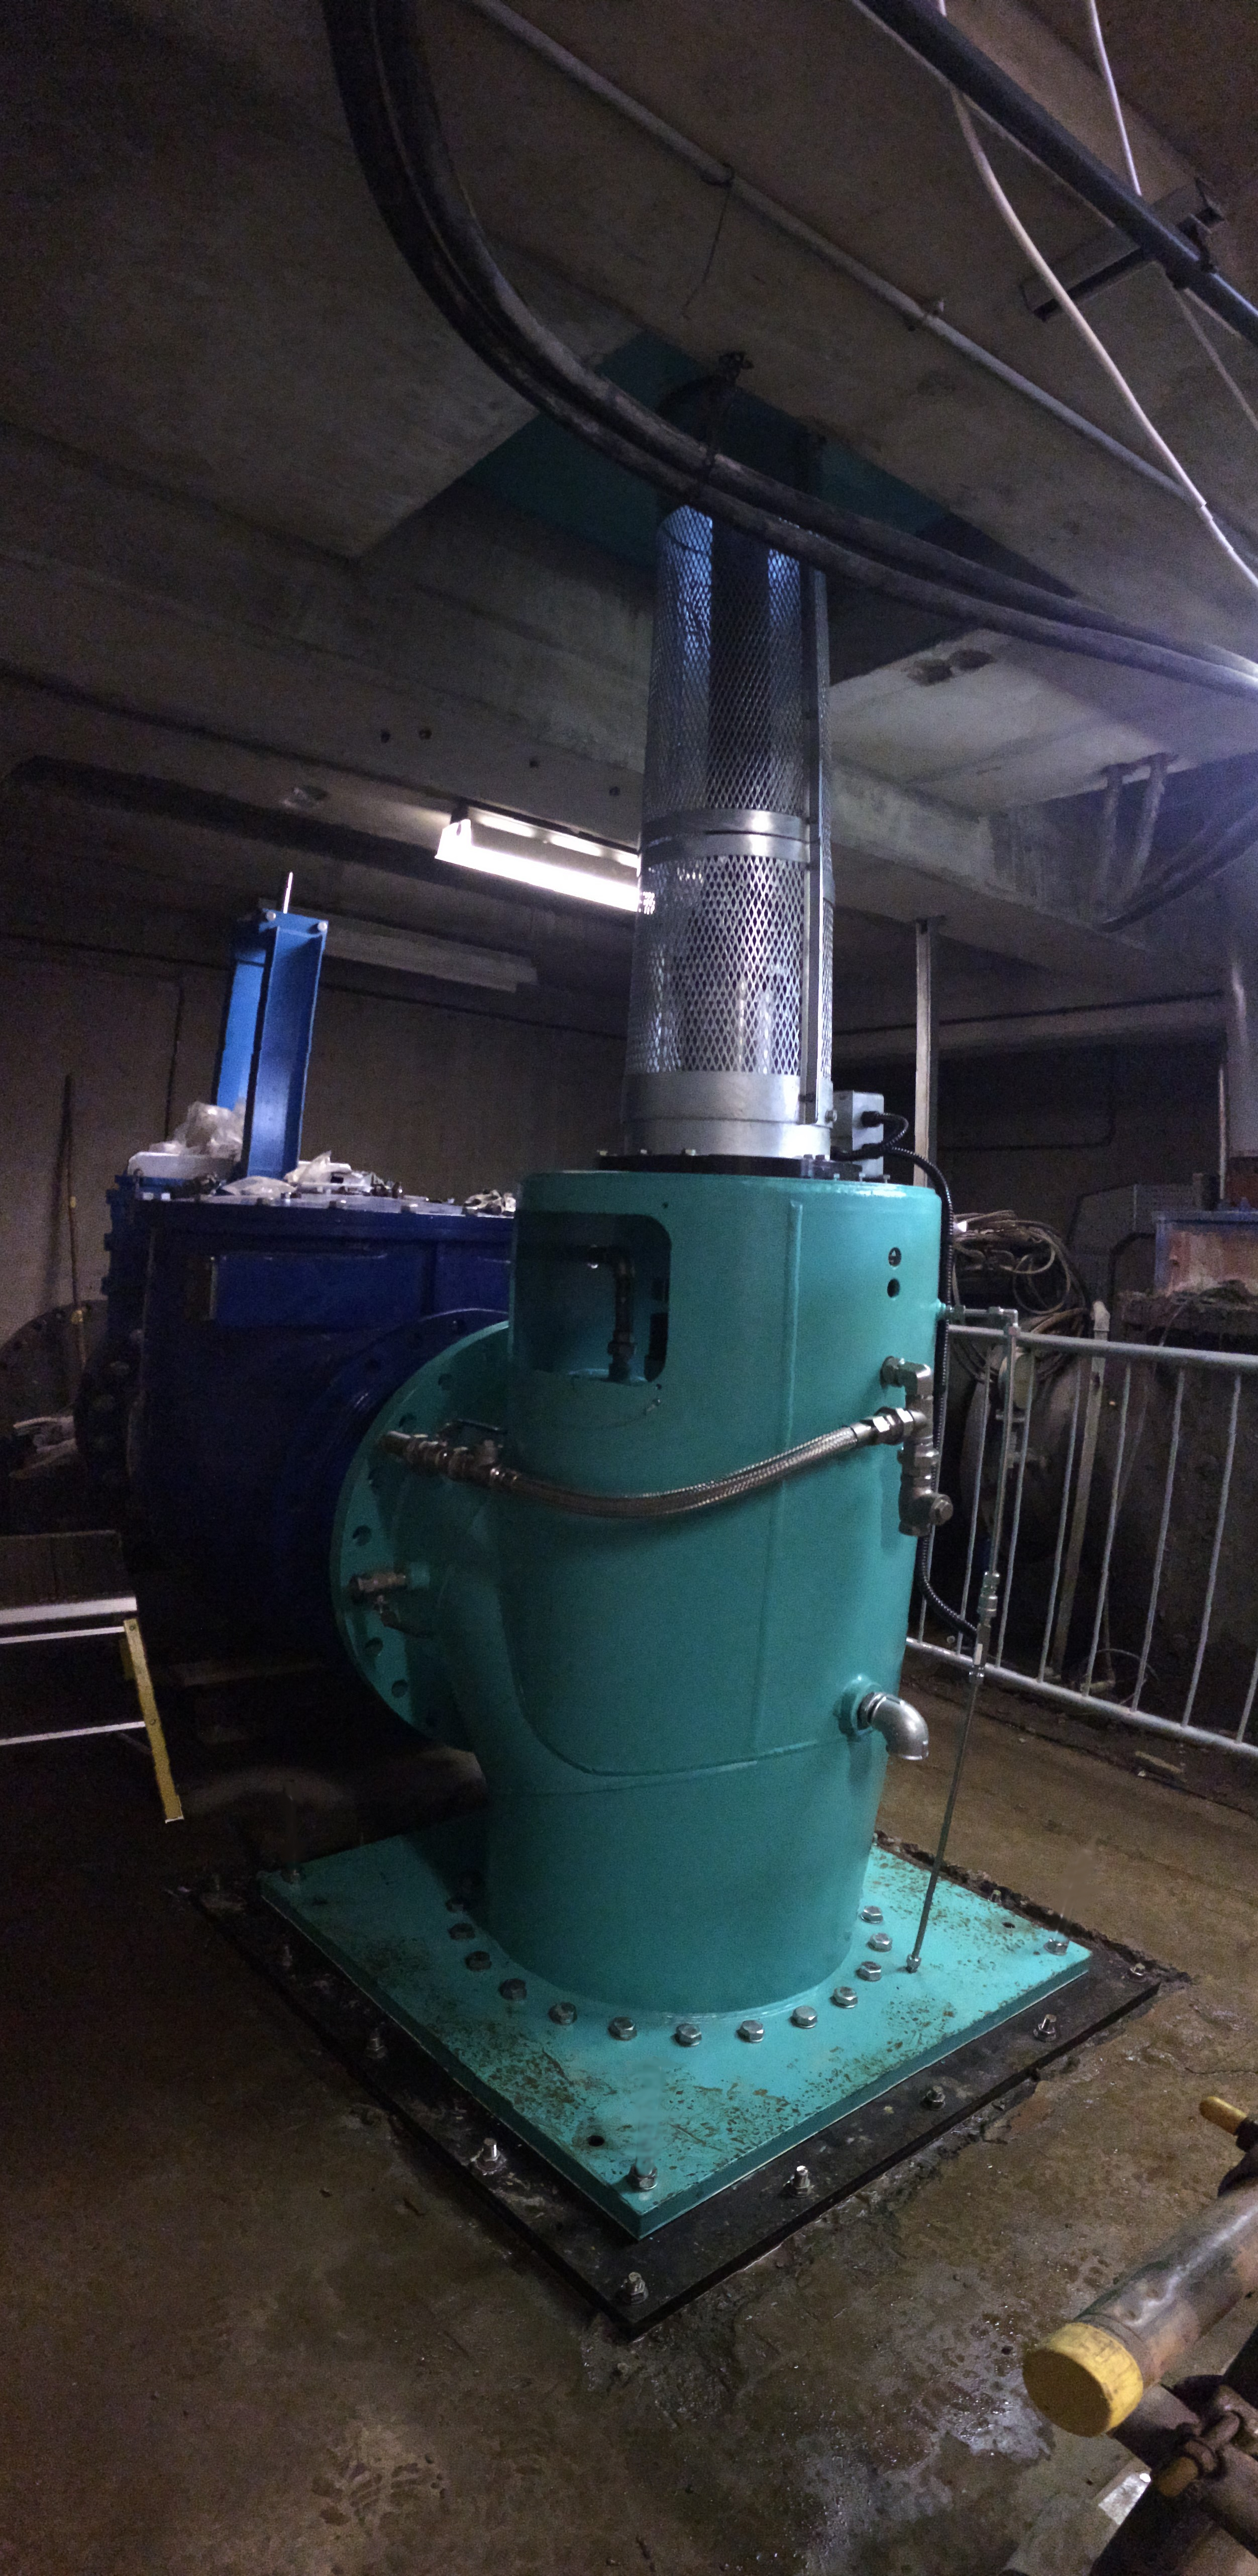 Bedford Pumps' stormwater pumps at Yorkshire Water's Elland Lowfield pumping station.